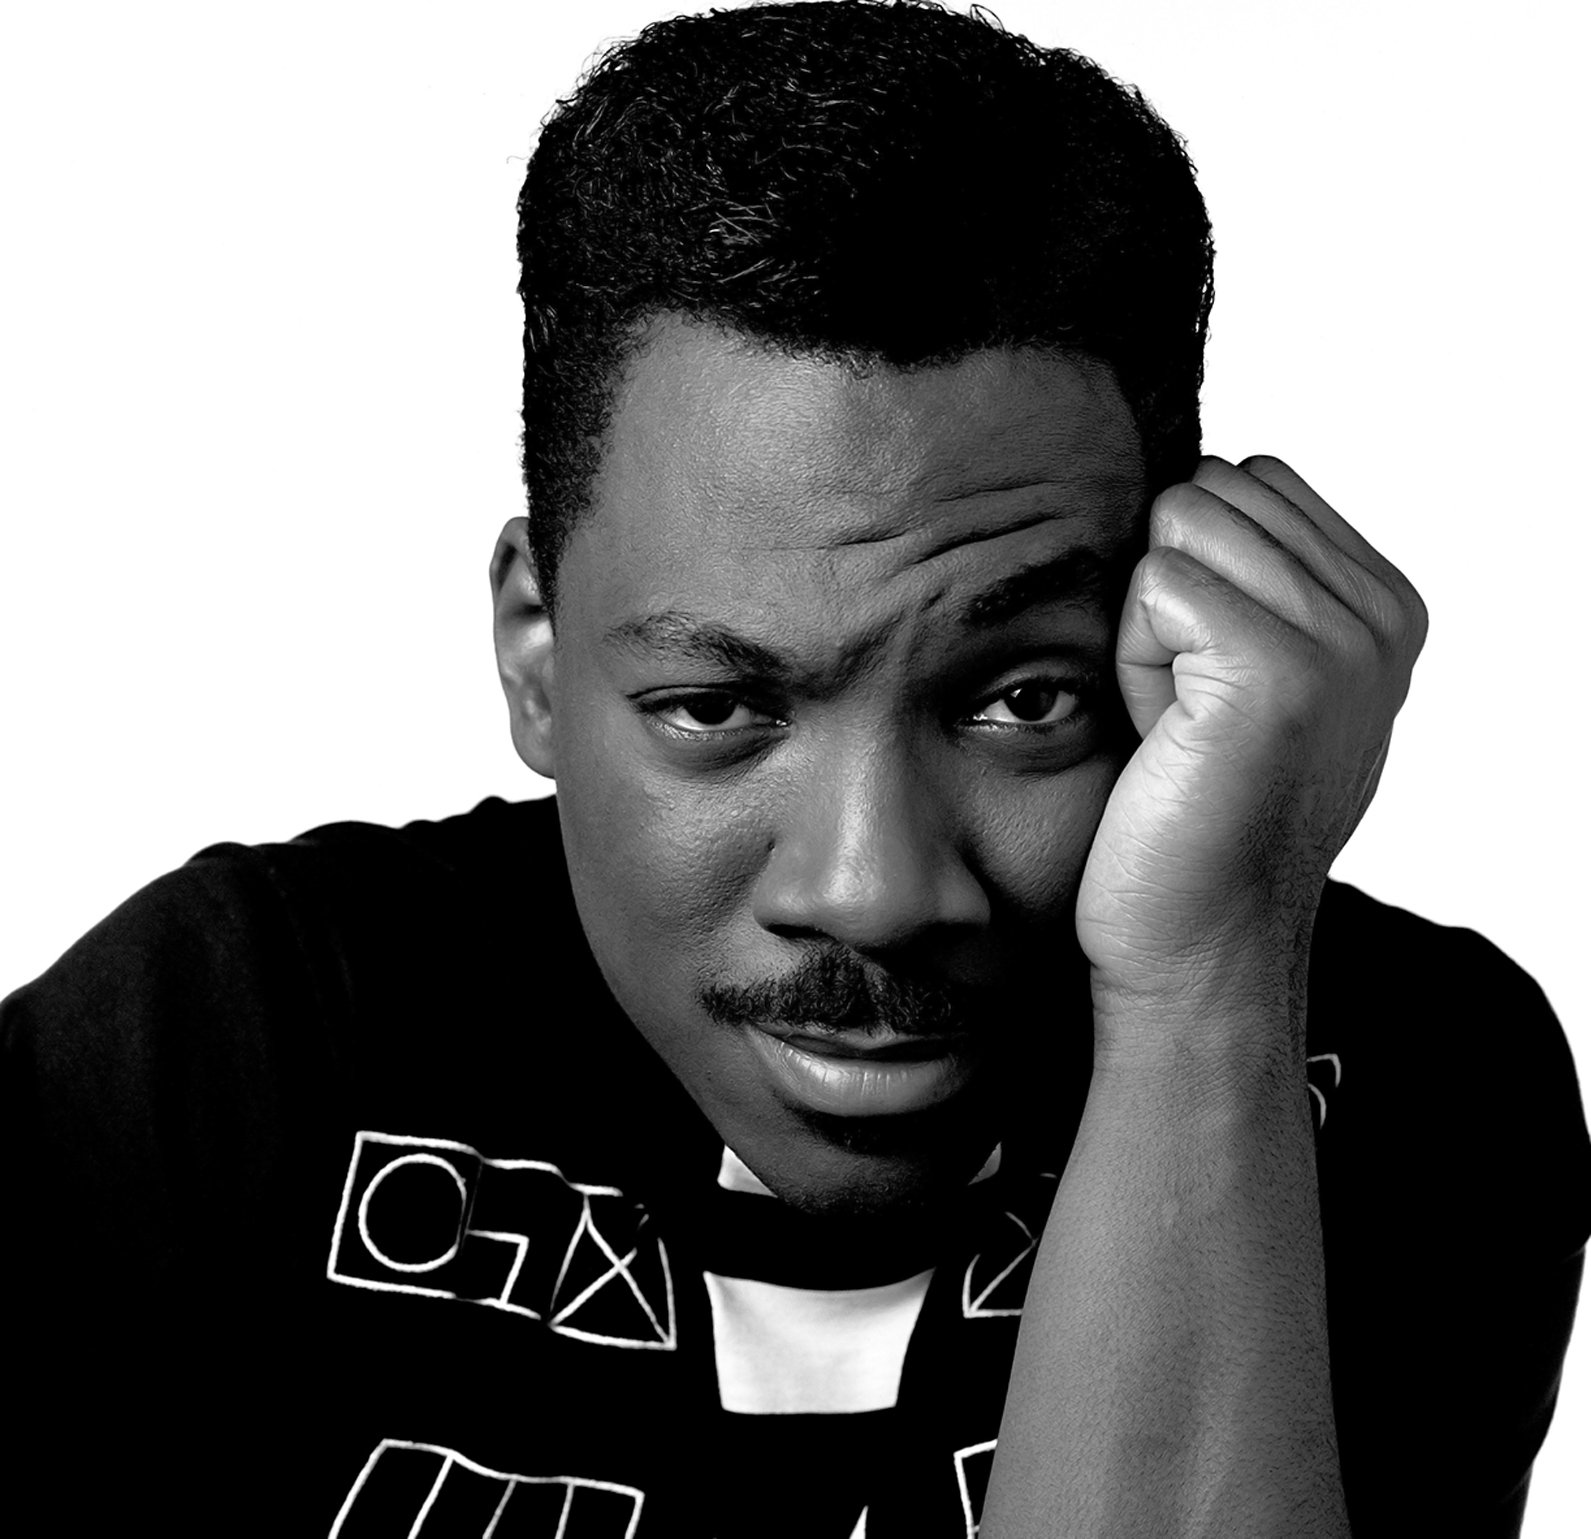 Eddie Murphy Image HD Wallpaper And Background